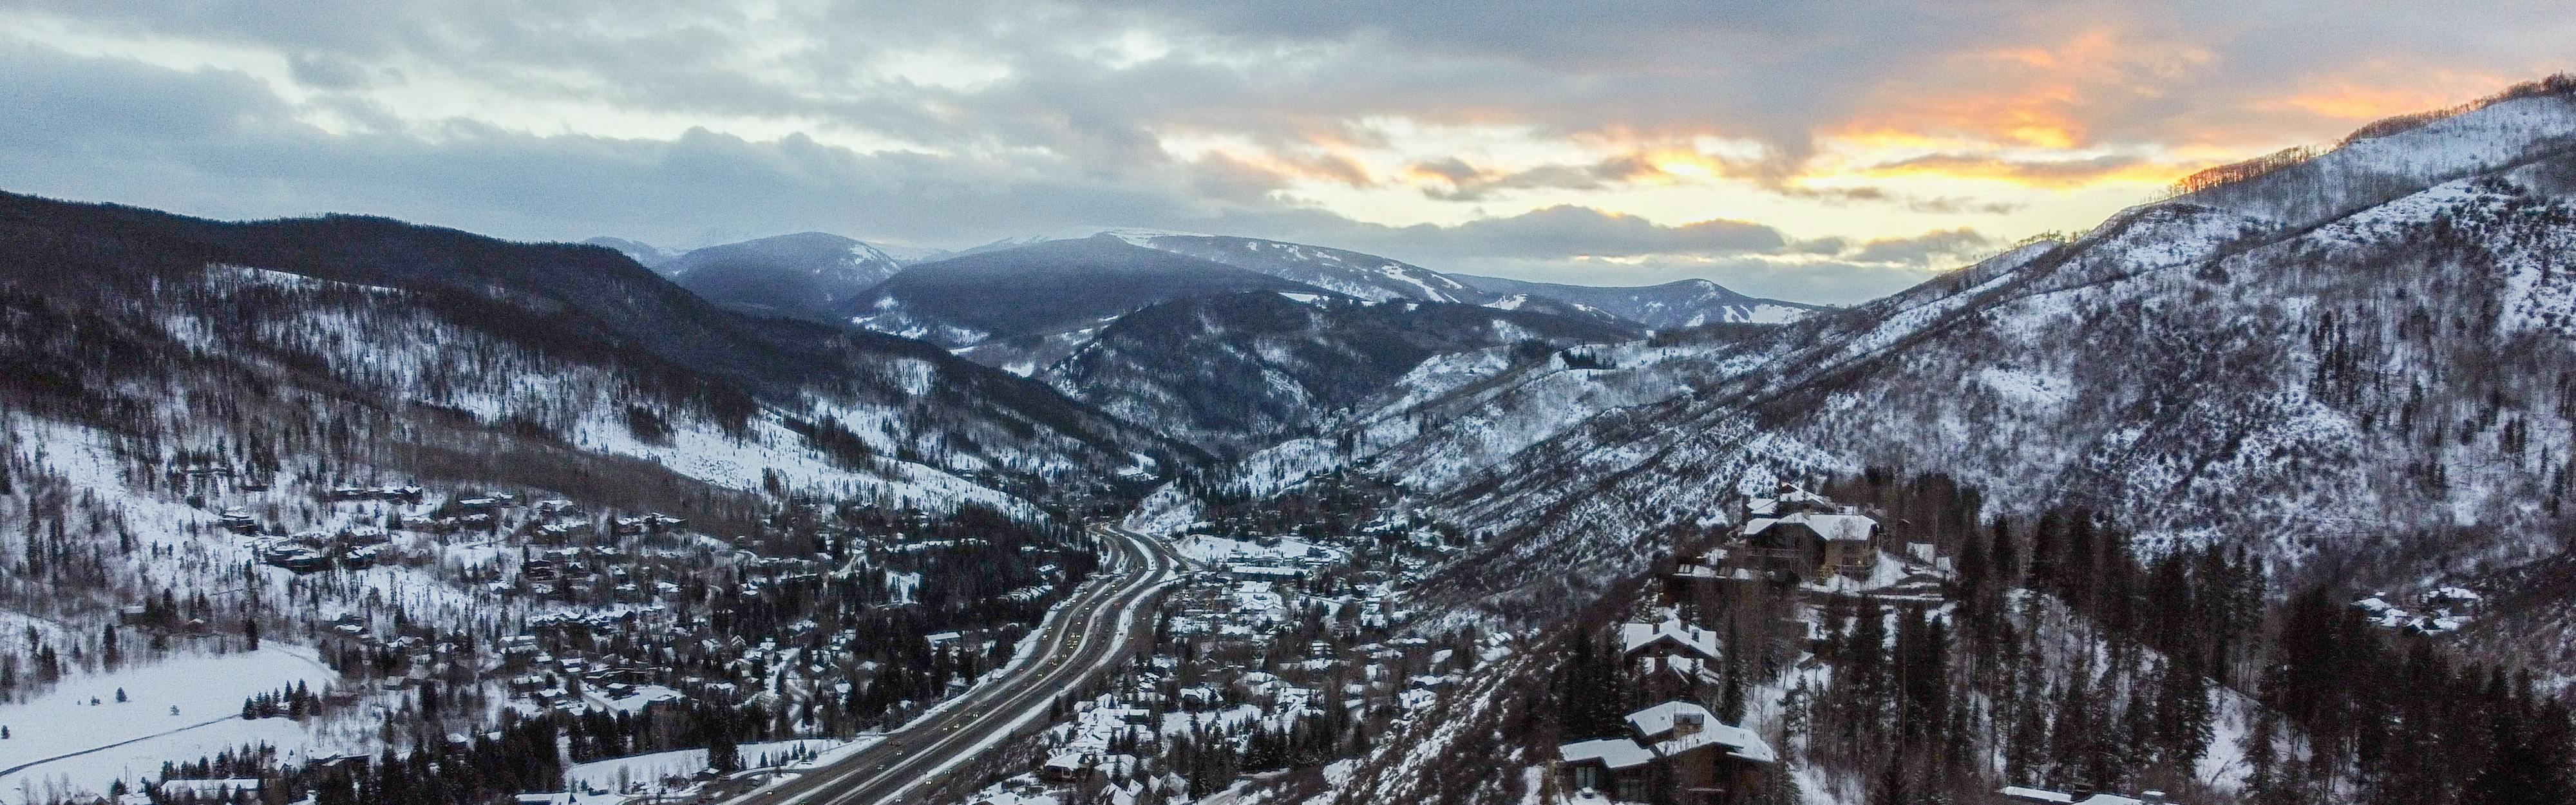 A view of the town and highways stretching through the mountains in Vail. 